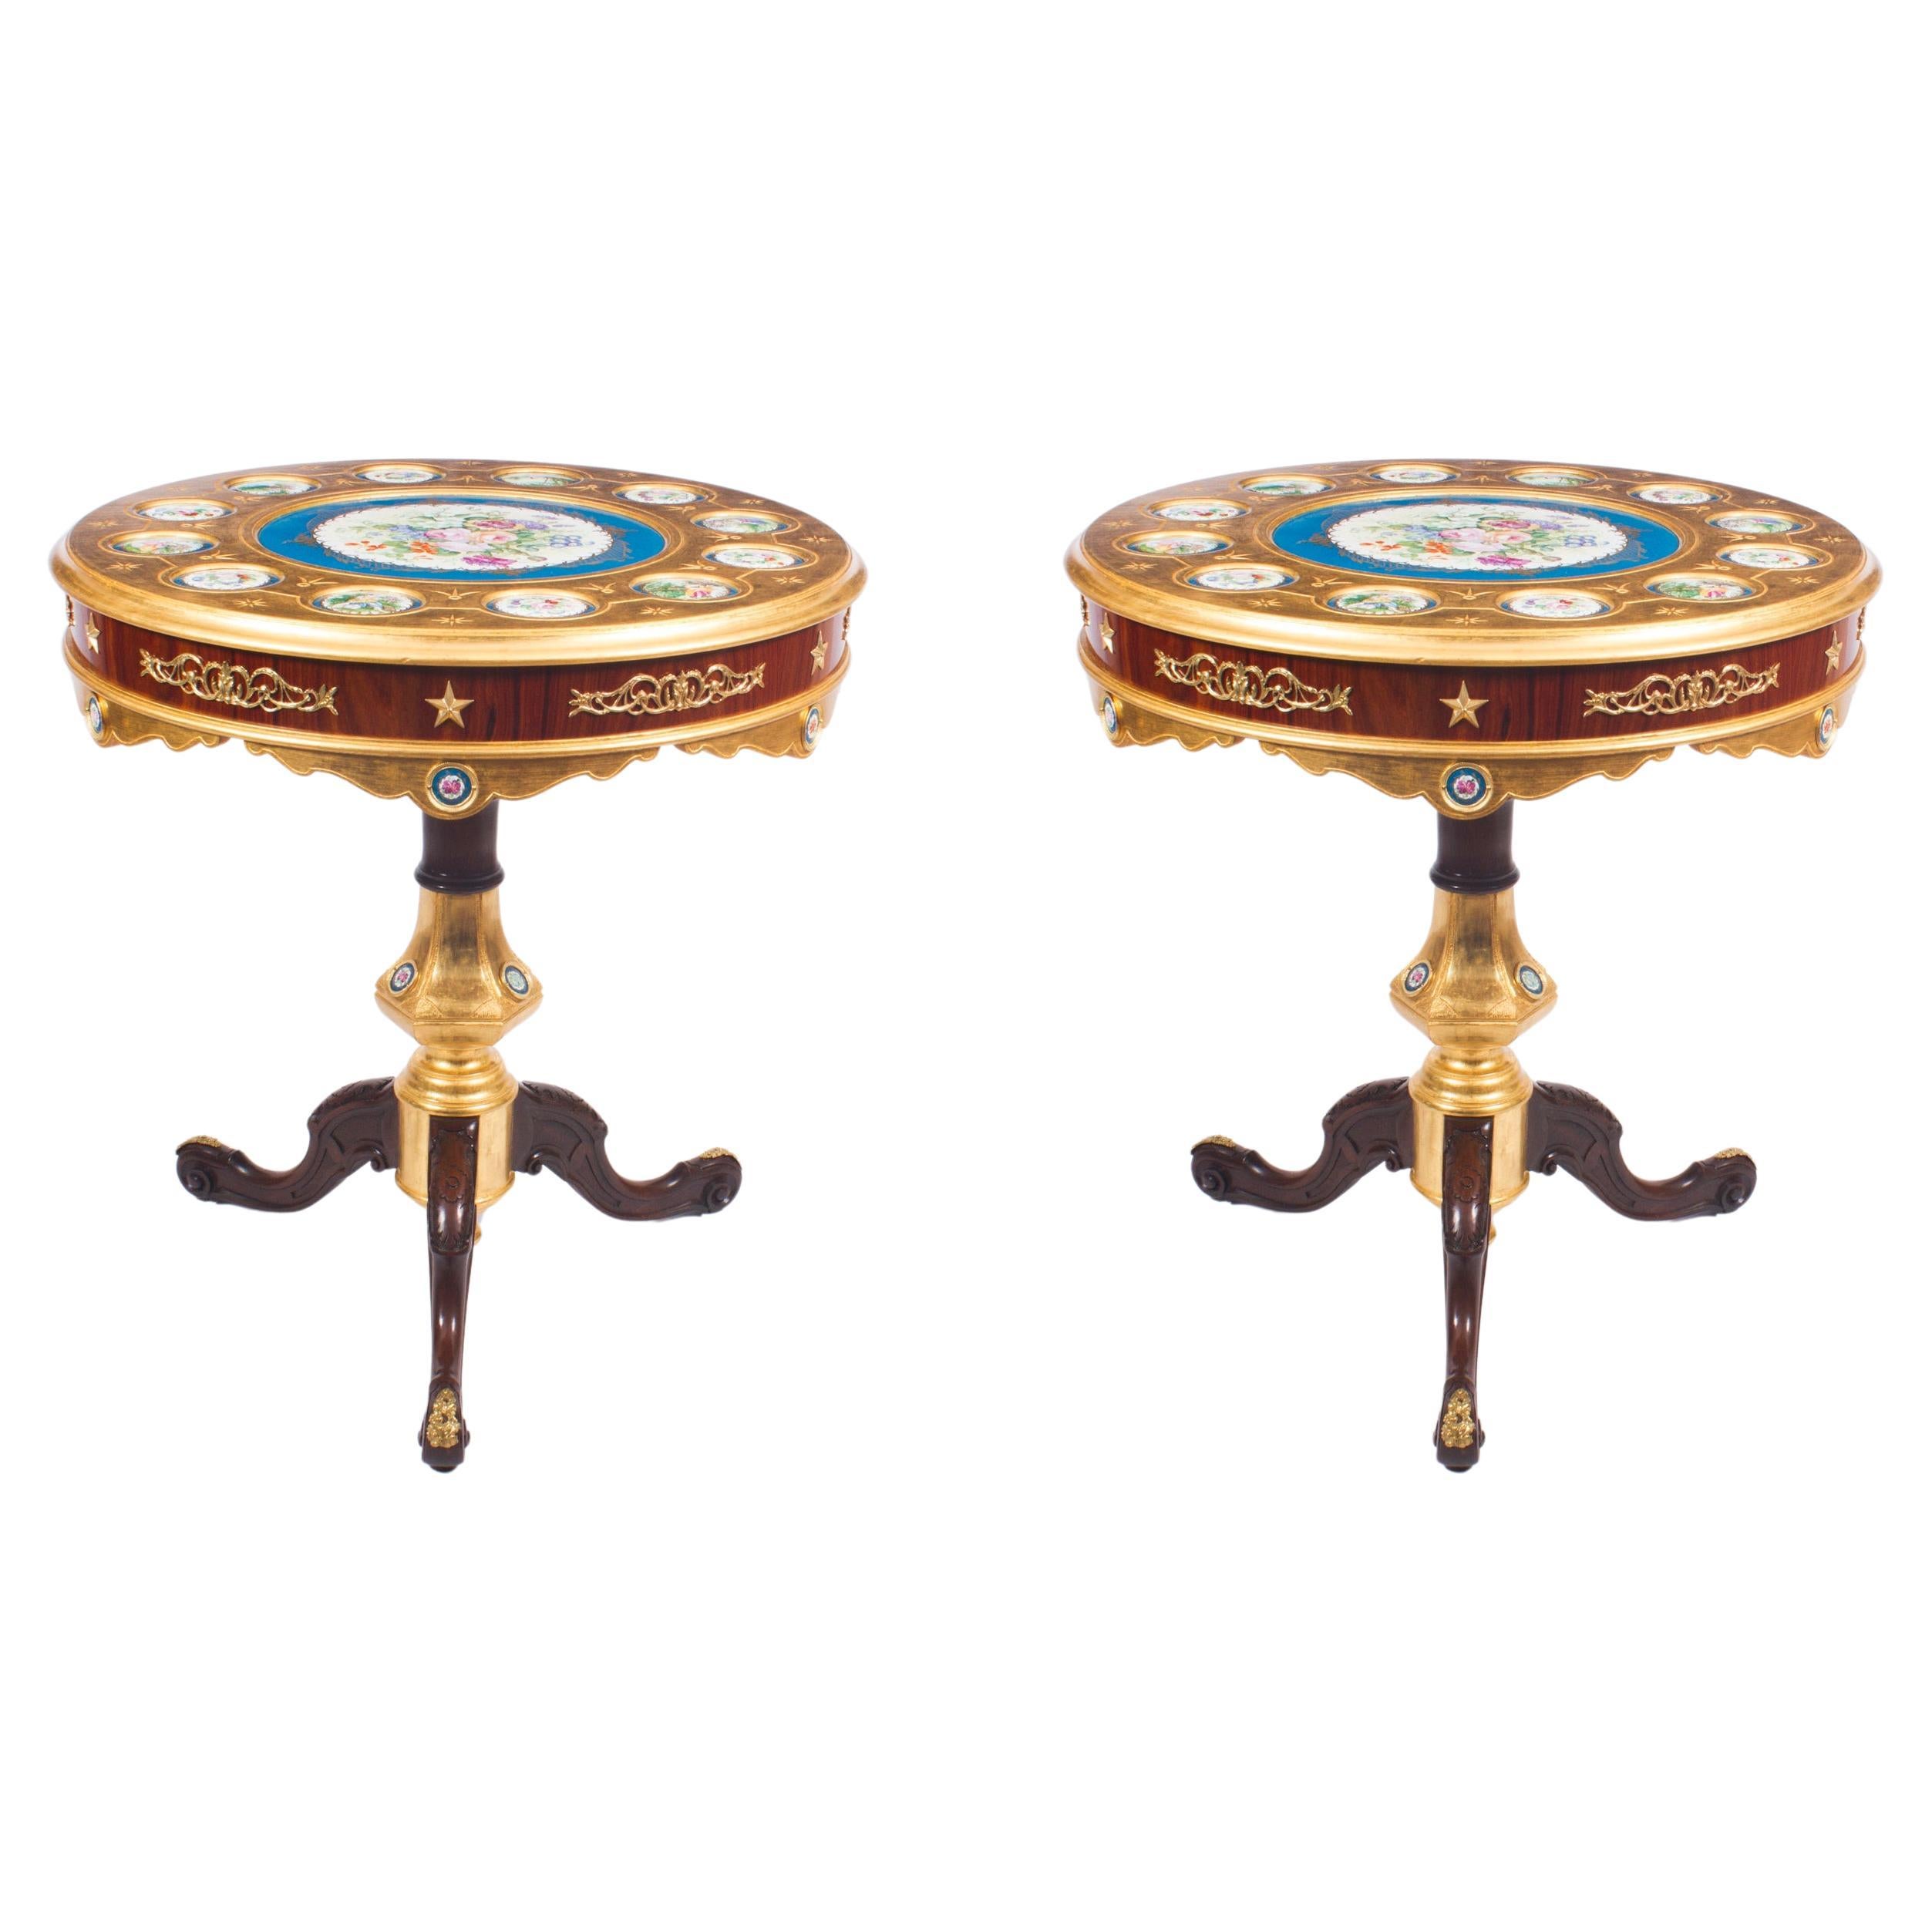 Pair of French Ormolu & Sevres Style Porcelain Occasional Side Tables 20th C For Sale